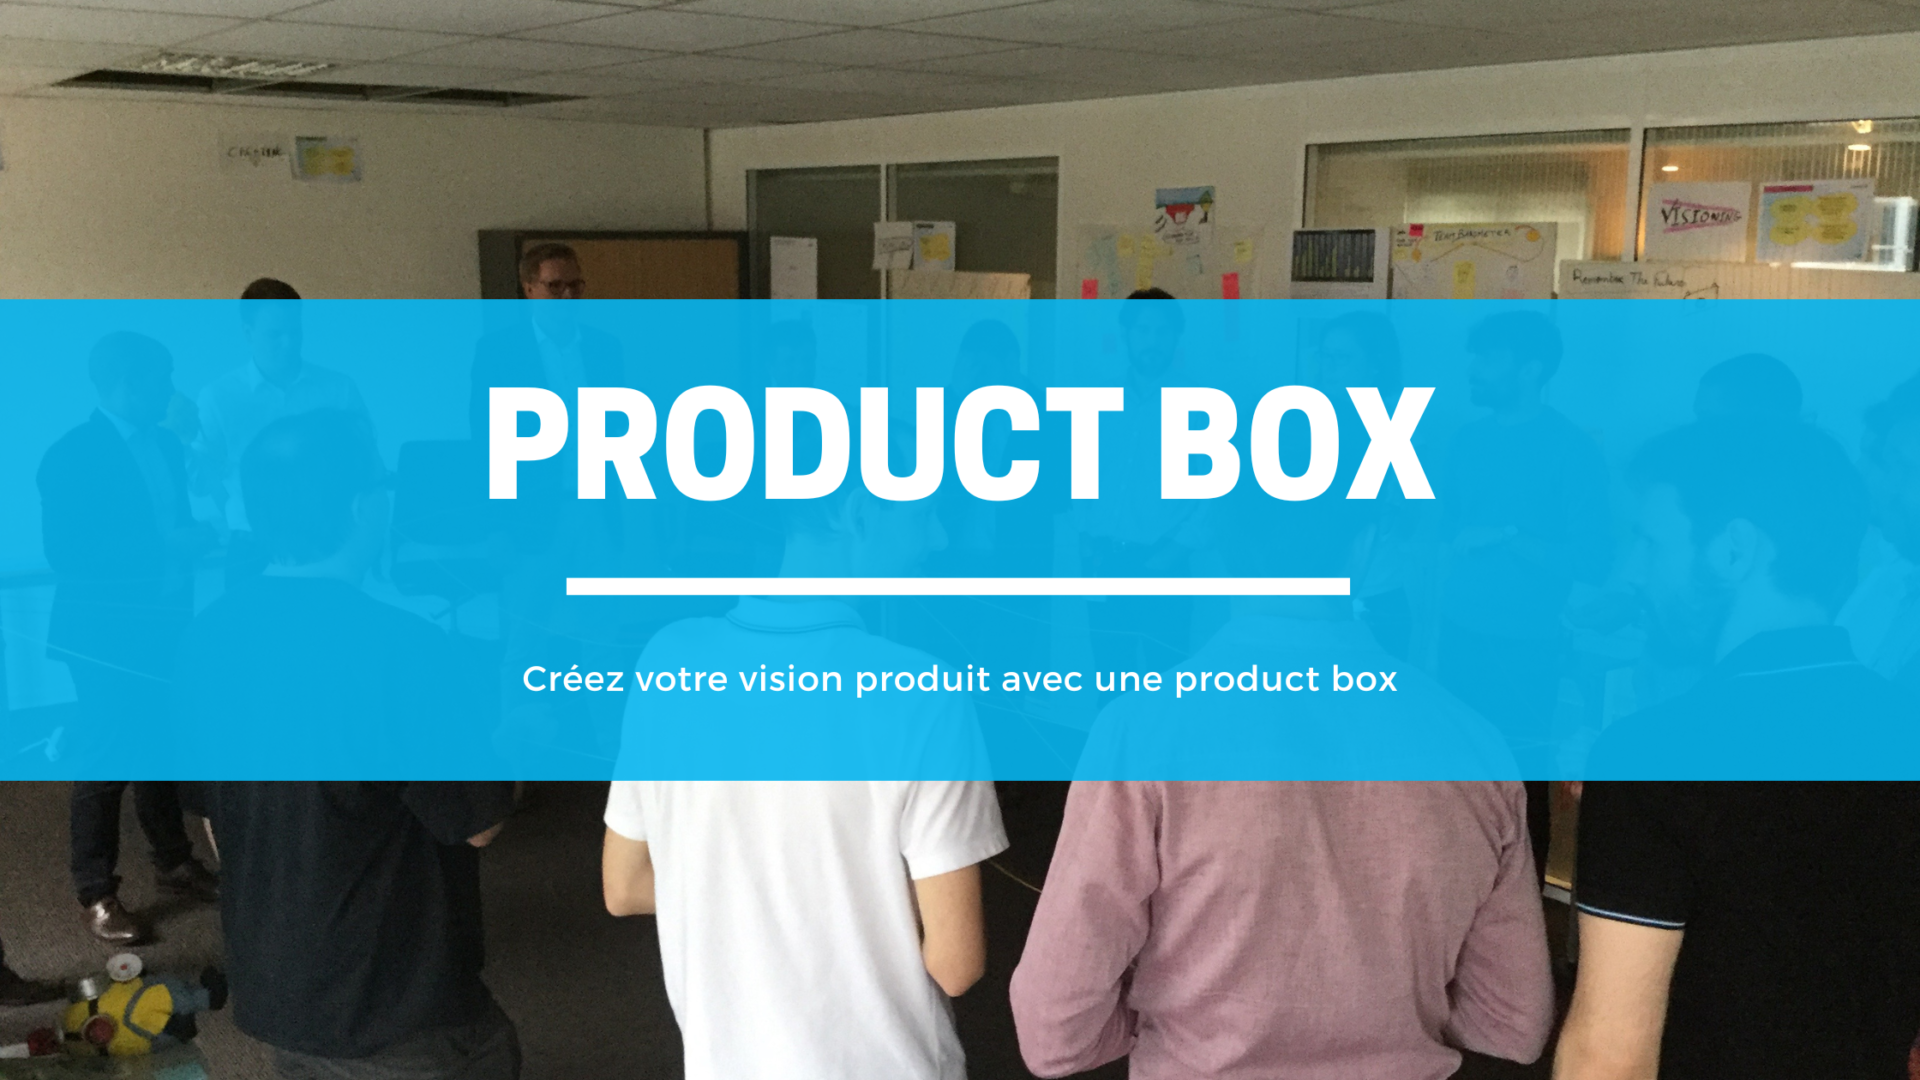 Product box : generate your product vision